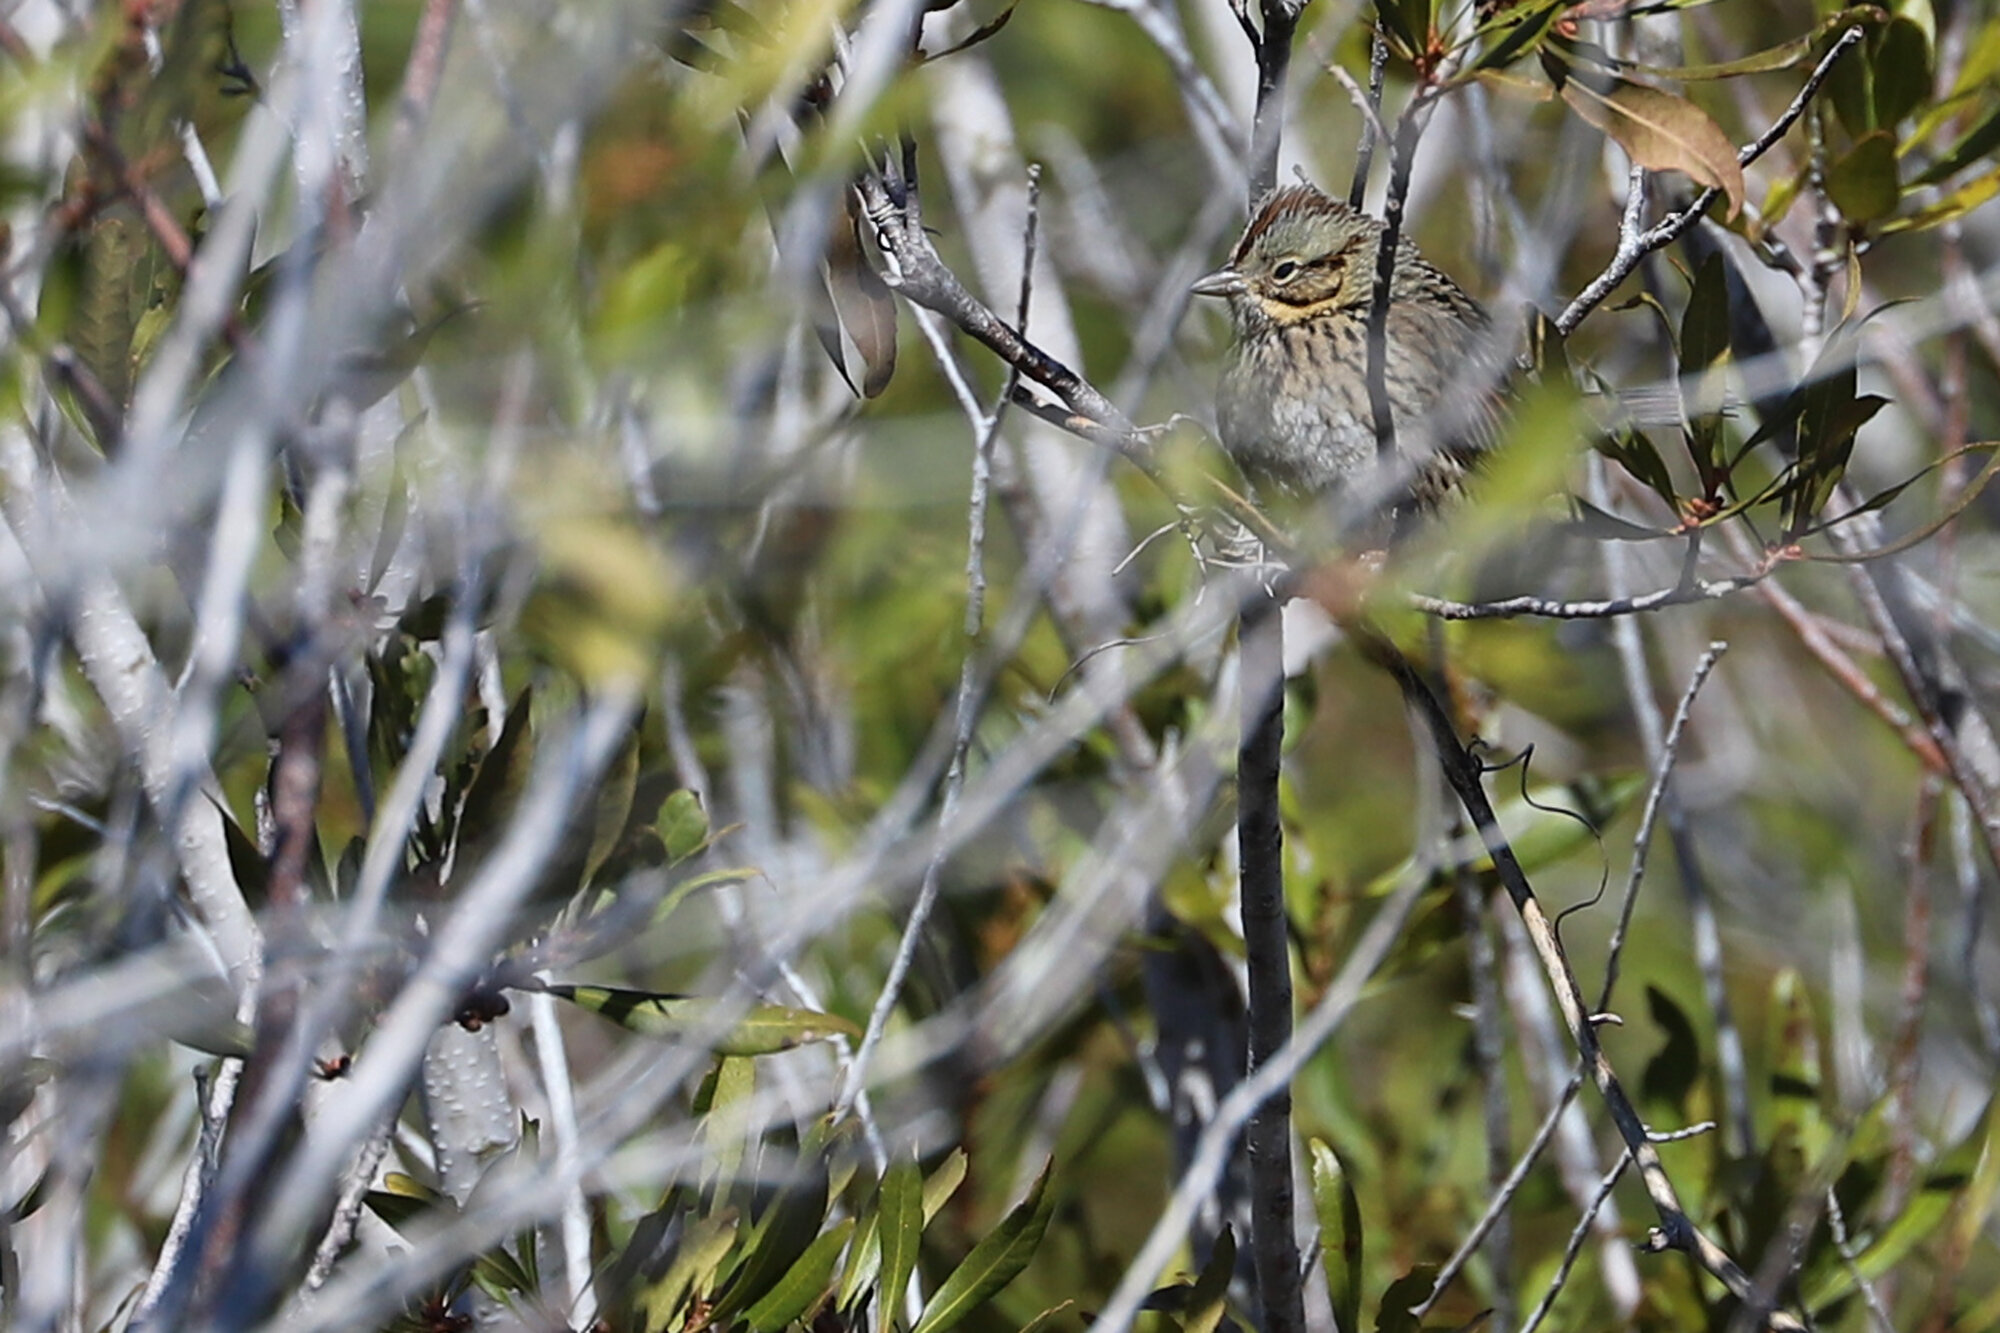  Lincoln's Sparrow / Princess Anne WMA Whitehurst Tract / 1 Mar 